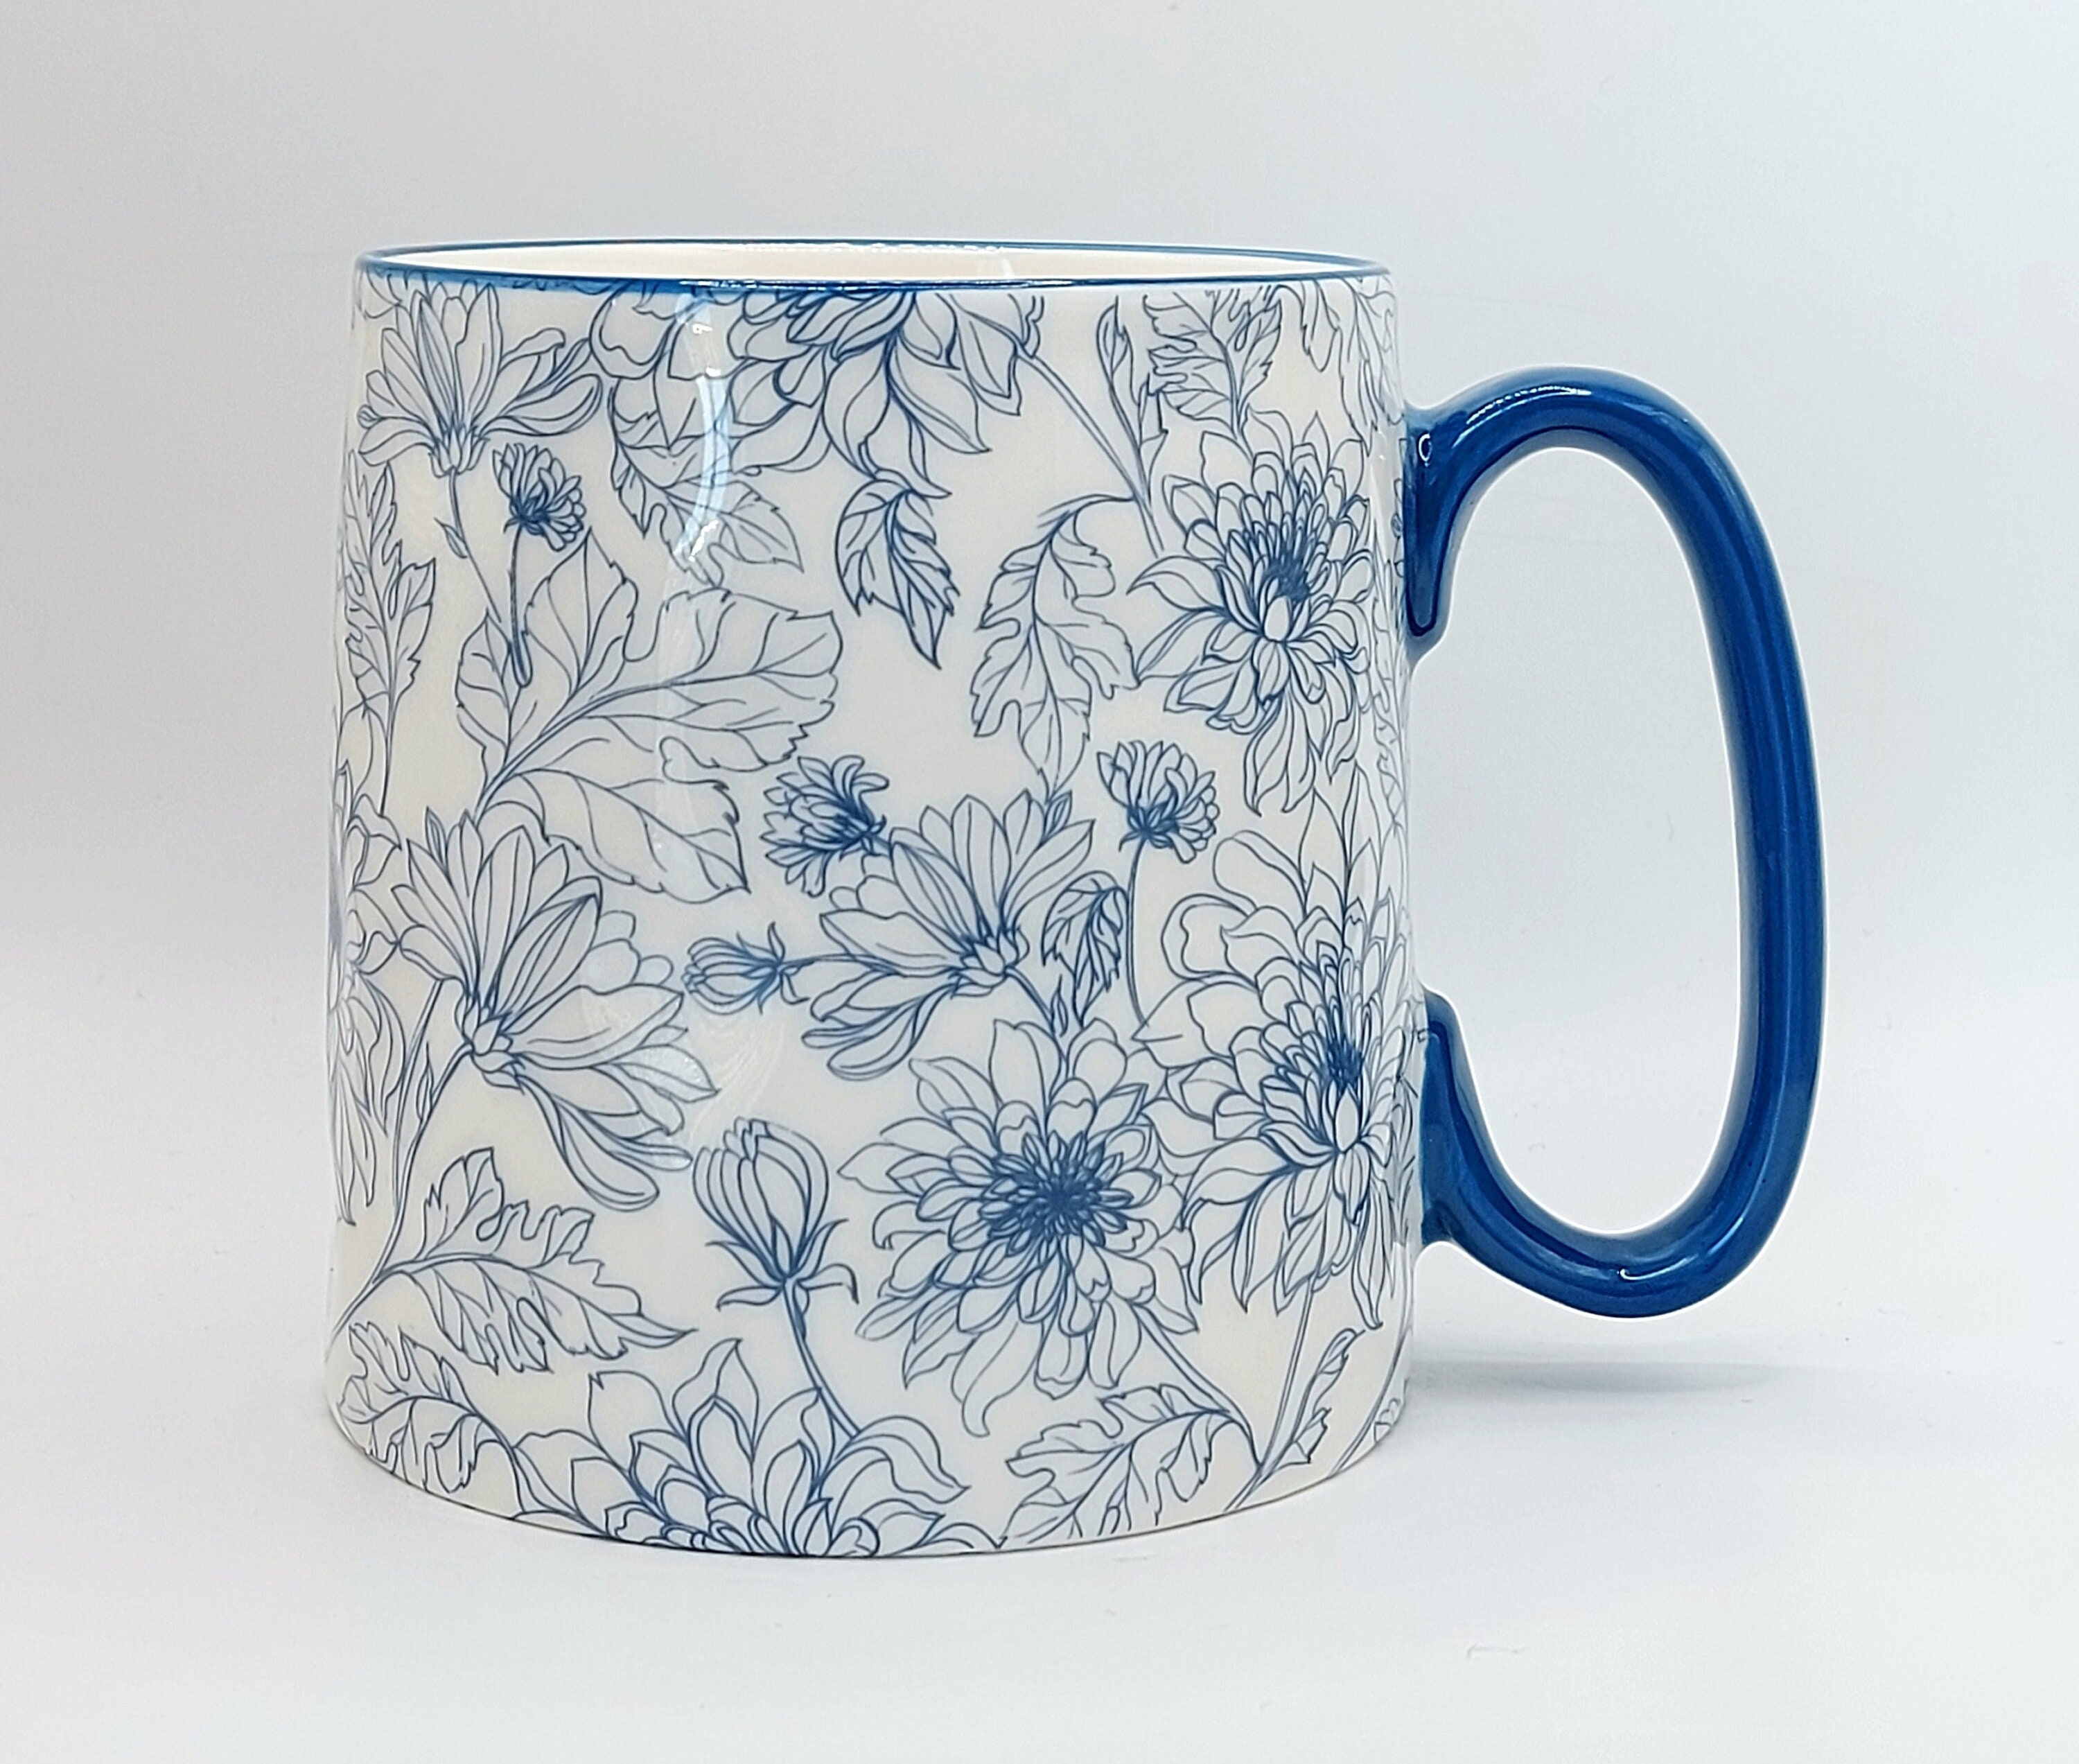 Blue Floral To Go Coffee Cups (8 count)